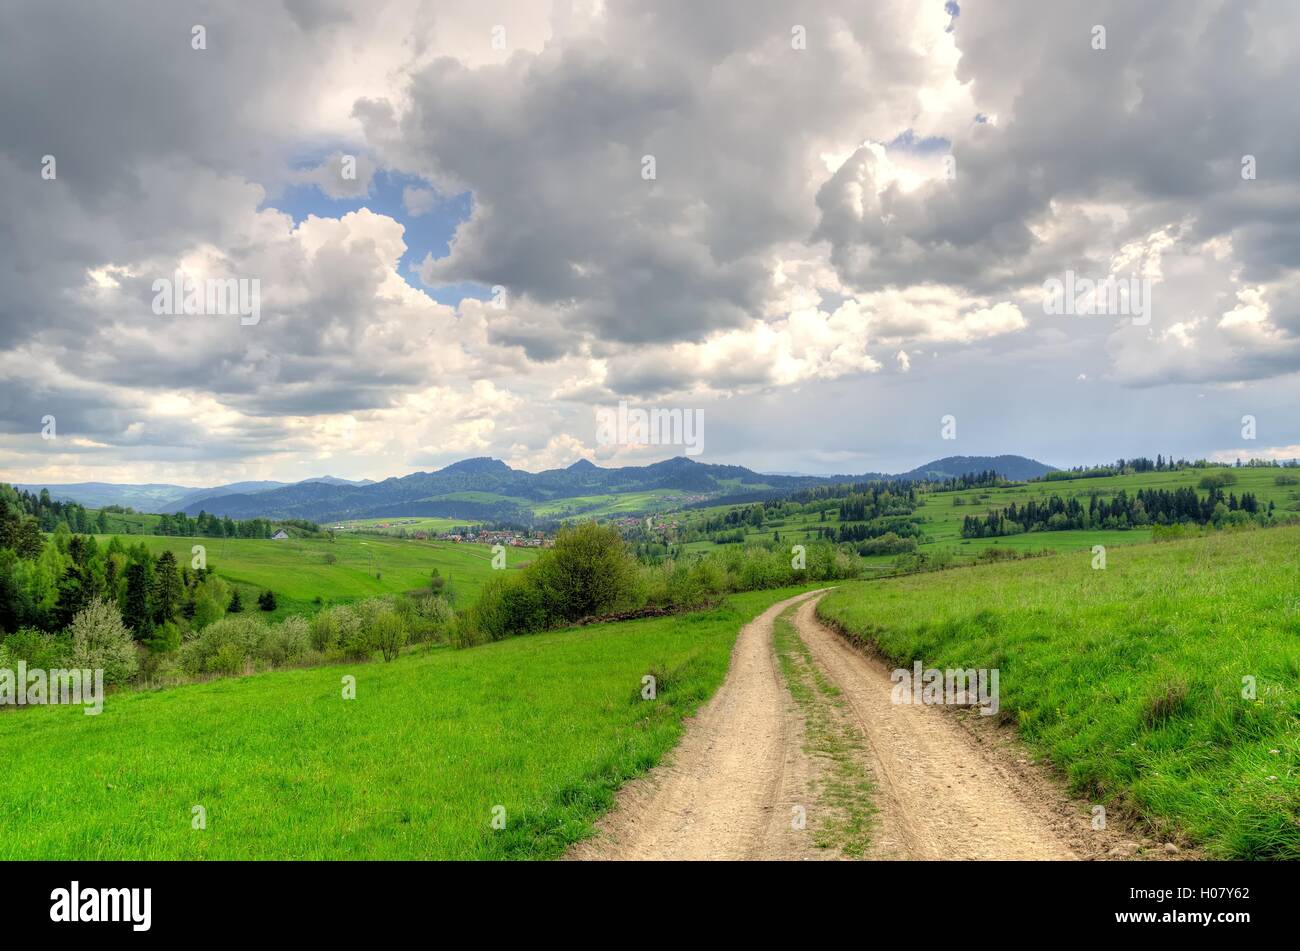 Spring mountain landscape. Mountain trail and forested hills. Stock Photo